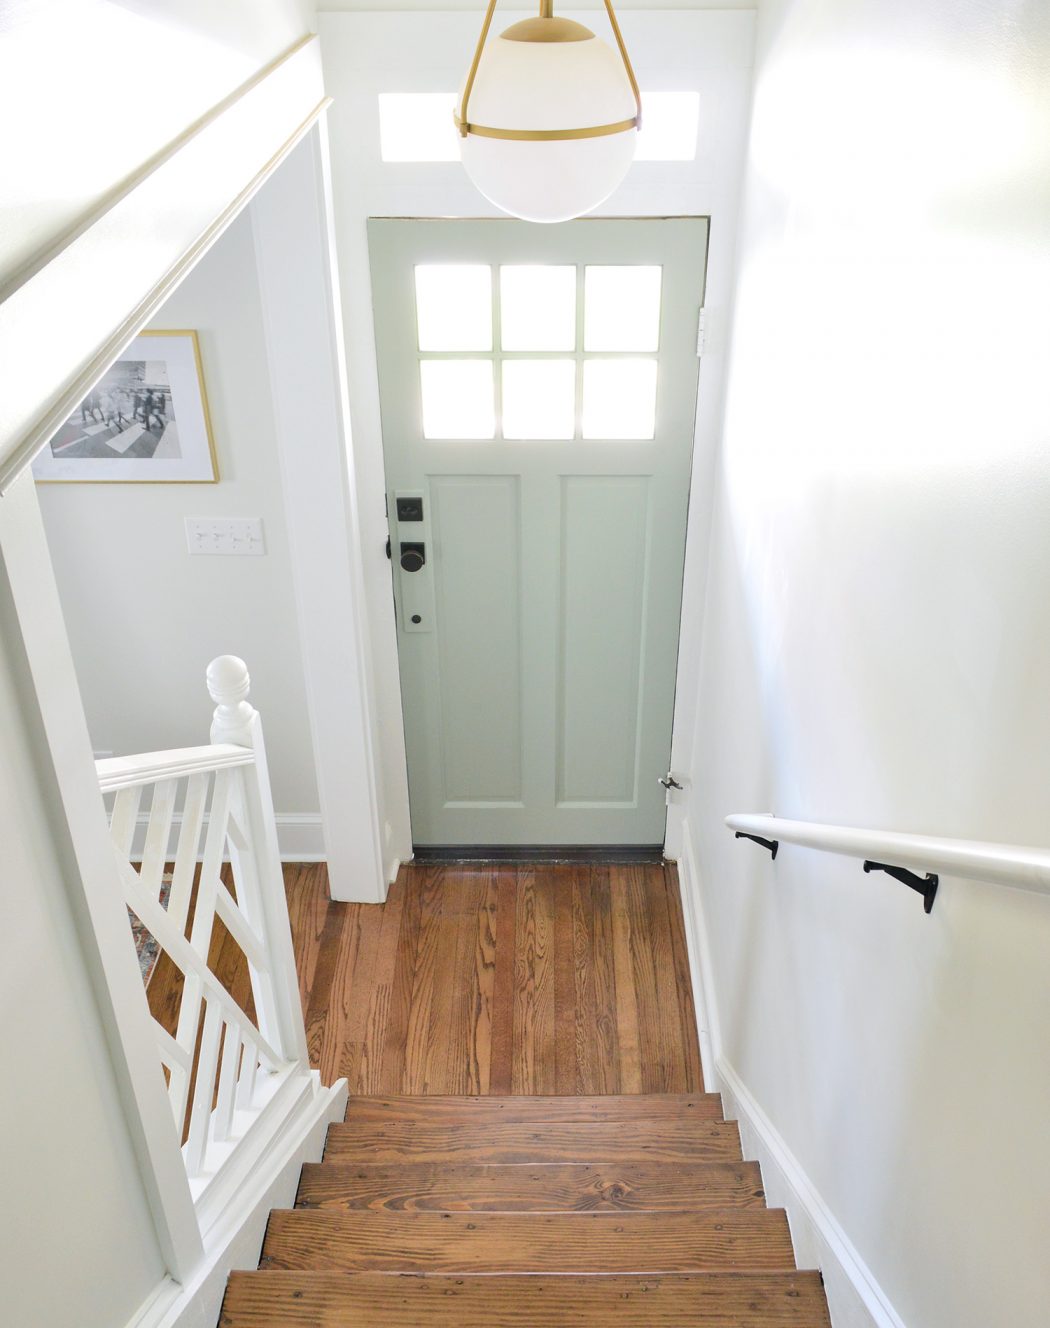 Light-filled entry way with wooden floor and front door painted Oyster Bay